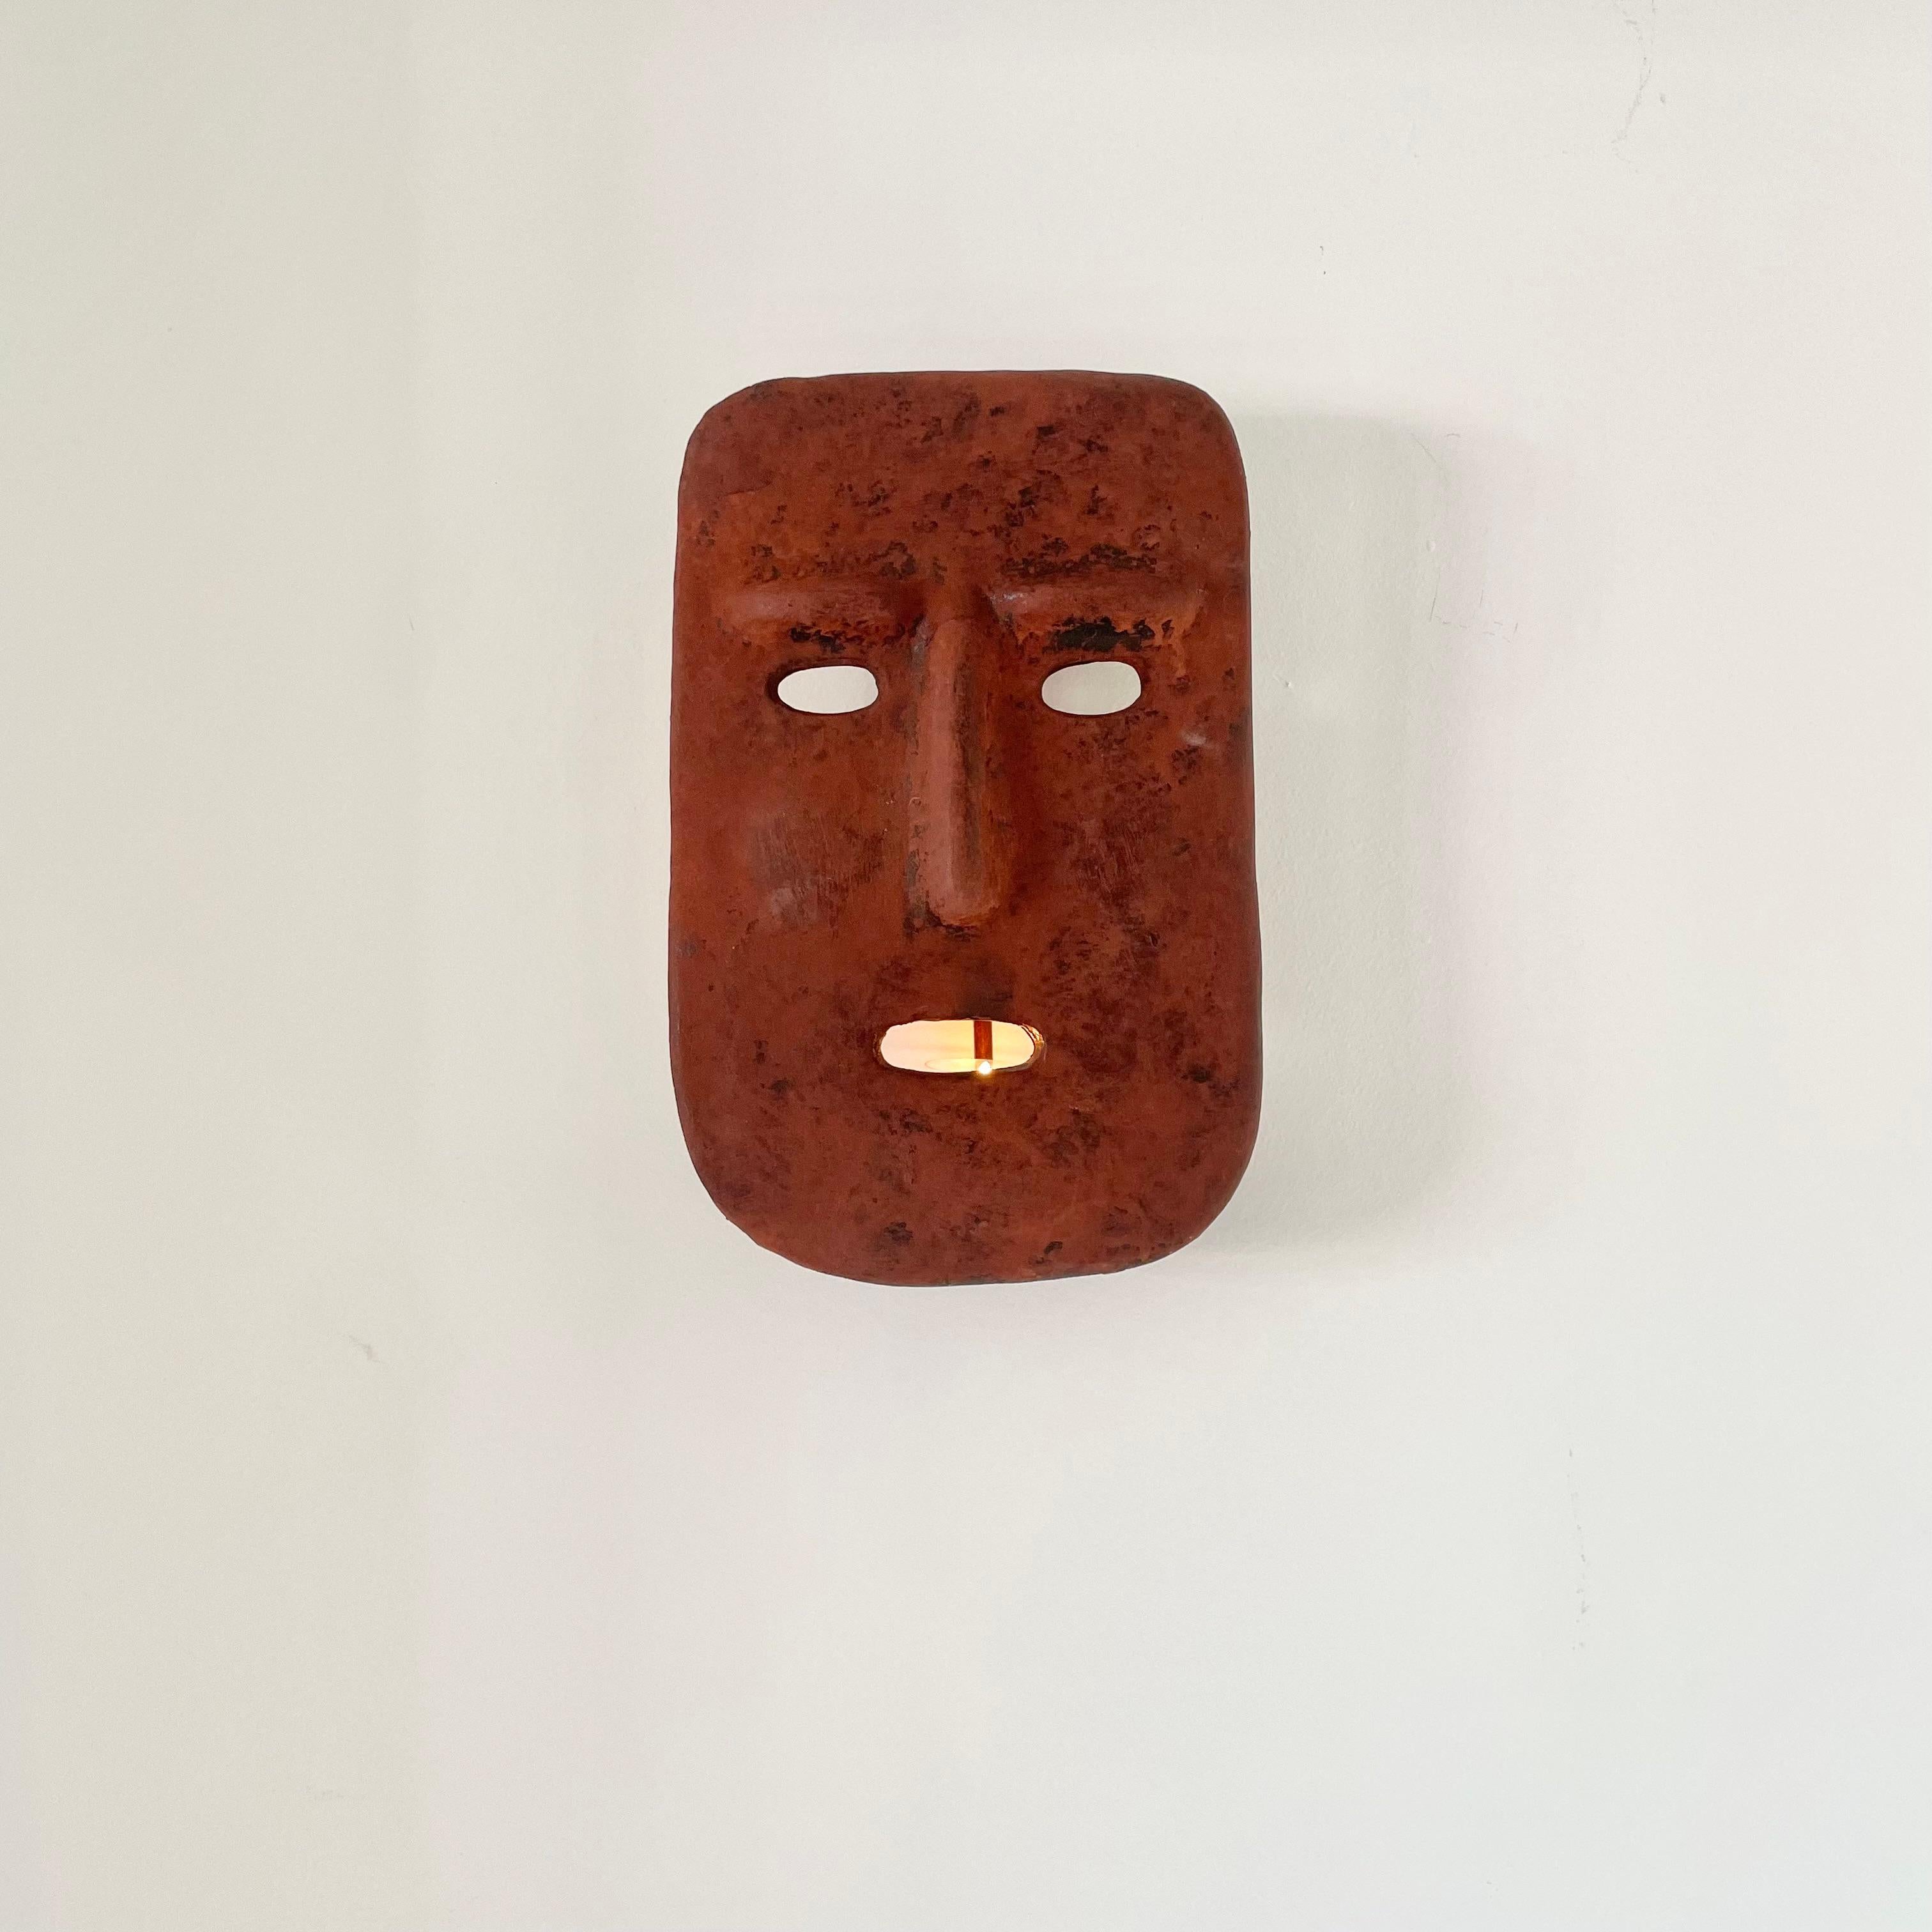 Candle Lit Mask Sconce, 1960s Italy For Sale 6